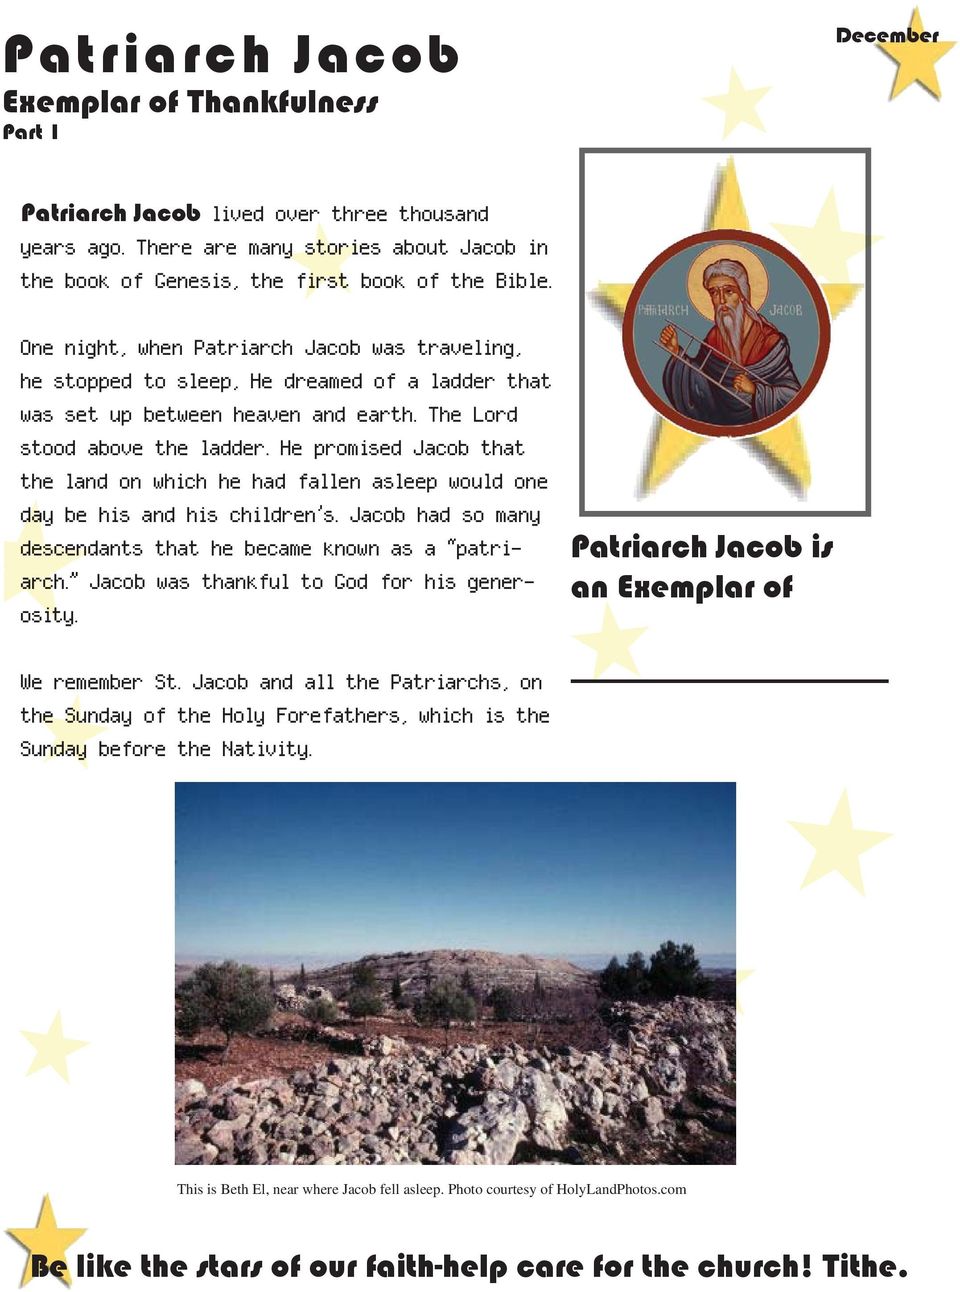 He promised Jacob that the land on which he had fallen asleep would one day be his and his children s. Jacob had so many descendants that he became known as a patriarch.